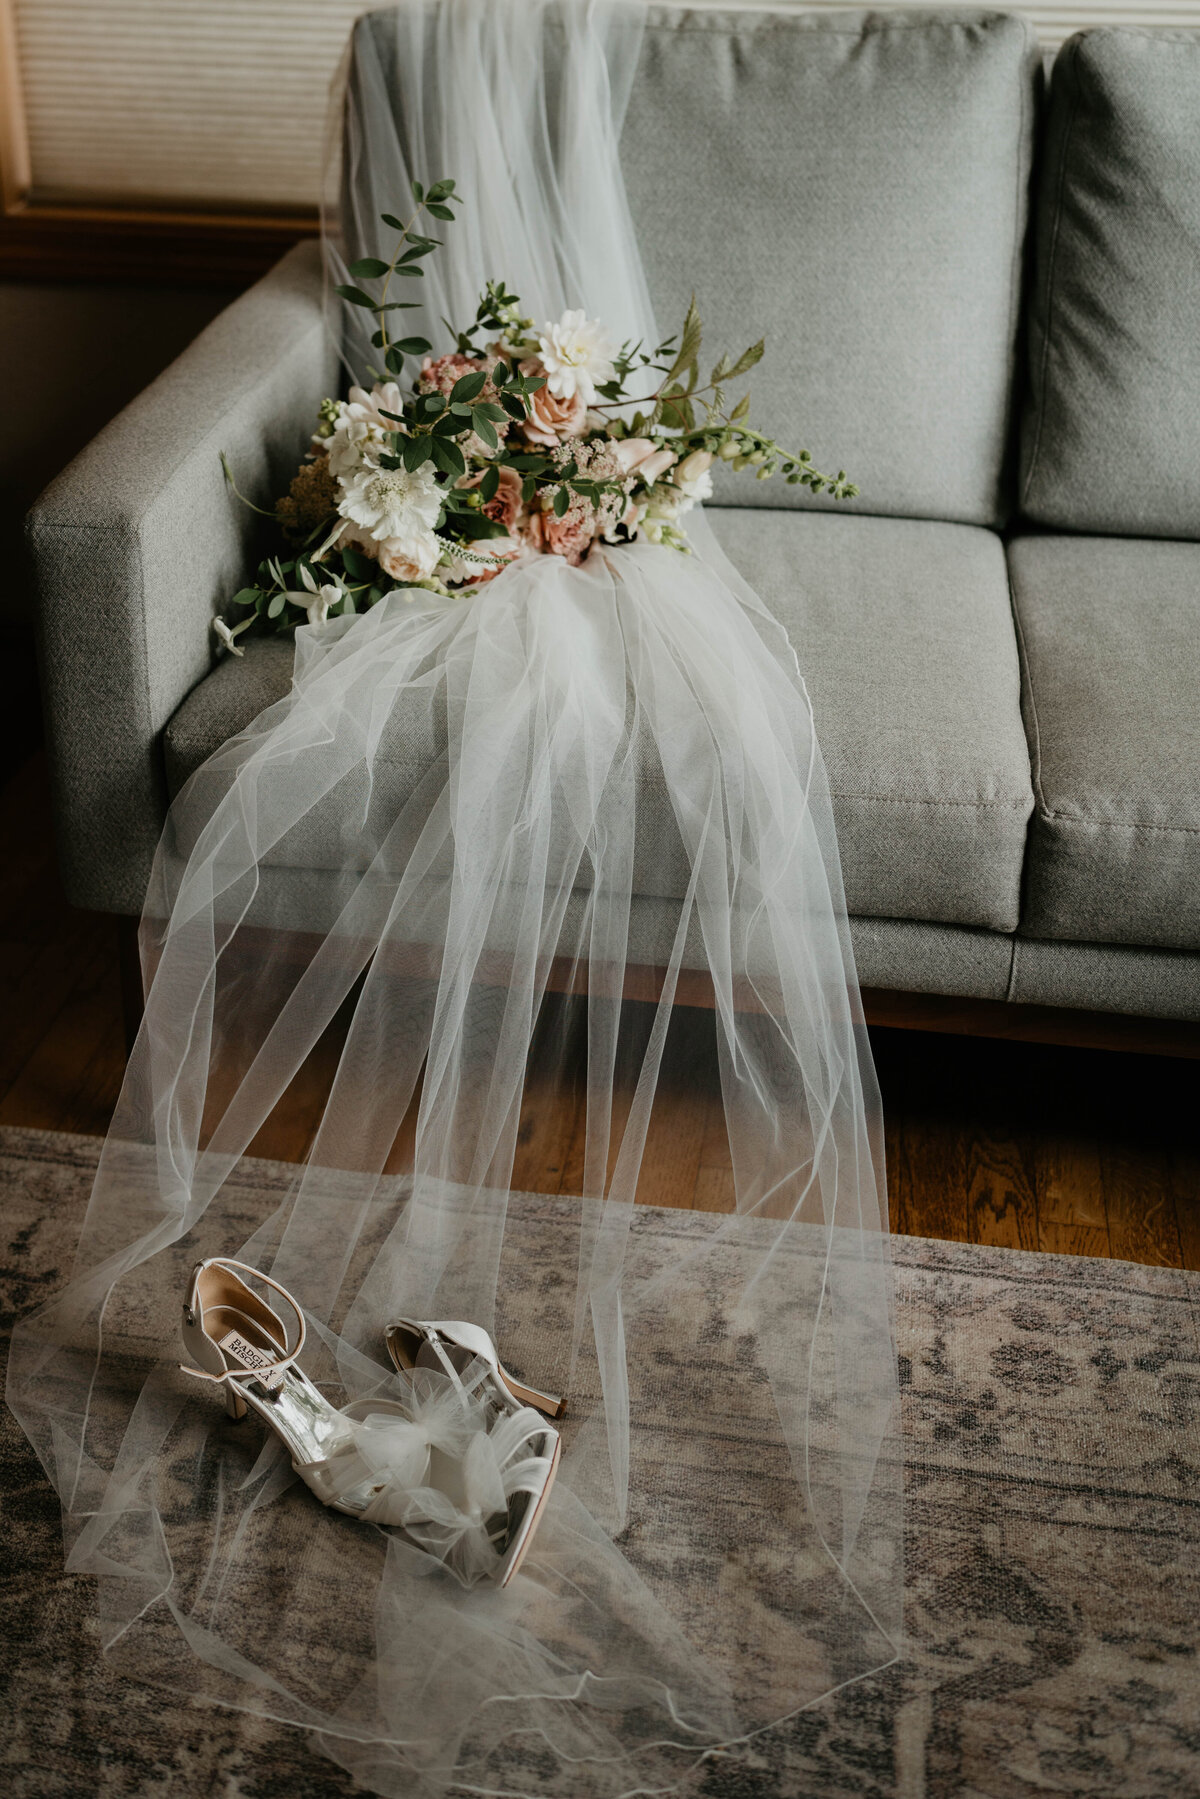 Bridal viel, shoes and flowers on a couch from a Willamette Valley vineyard wedding